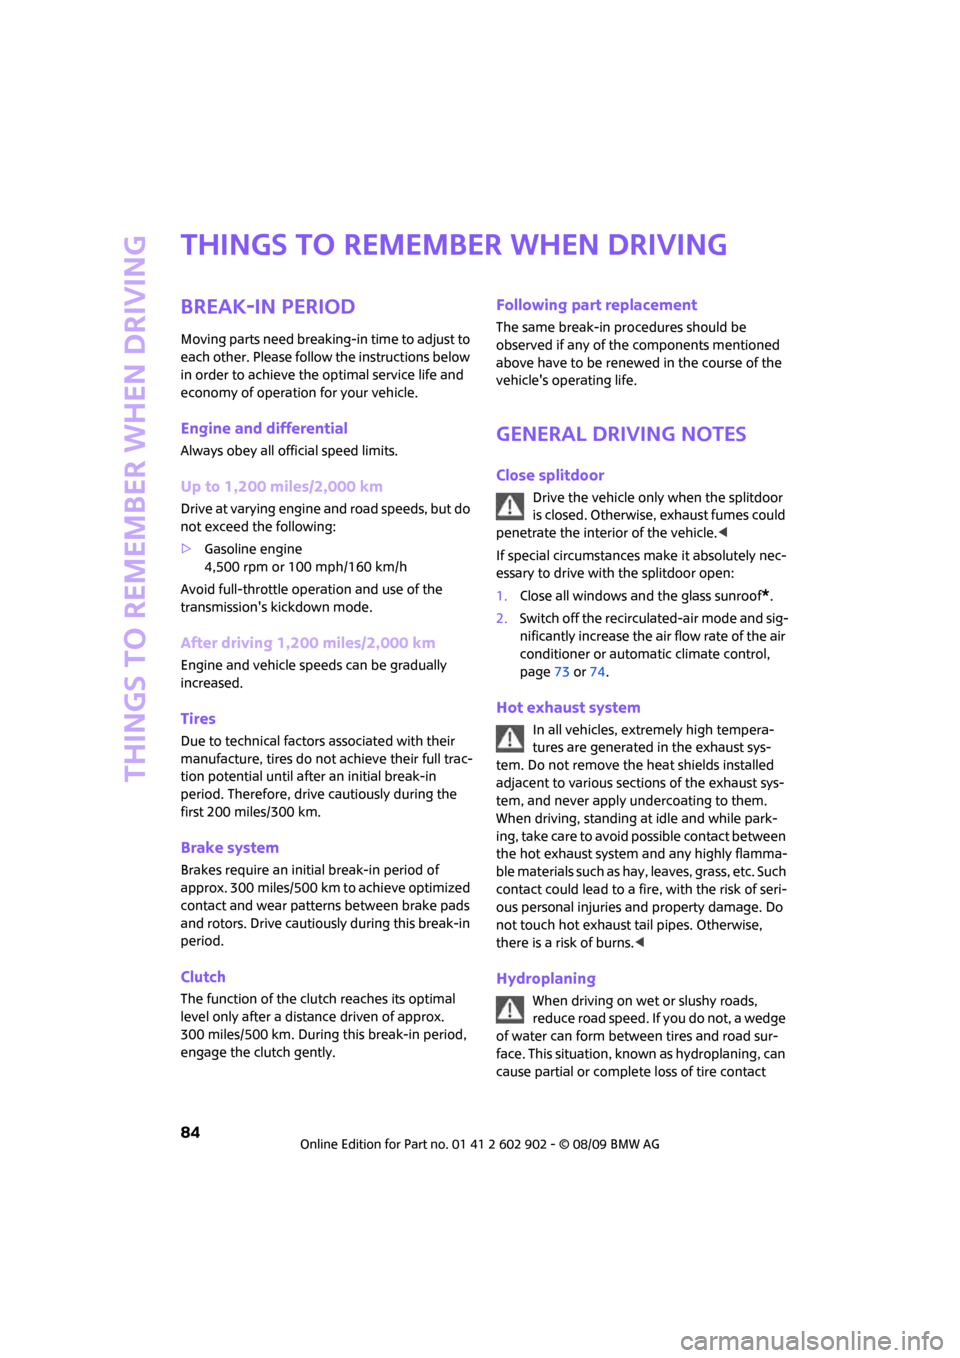 MINI Clubman 2010 Manual Online Things to remember when driving
84
Things to remember when driving
Break-in period
Moving parts need breaking-in time to adjust to 
each other. Please follow the instructions below 
in order to achiev